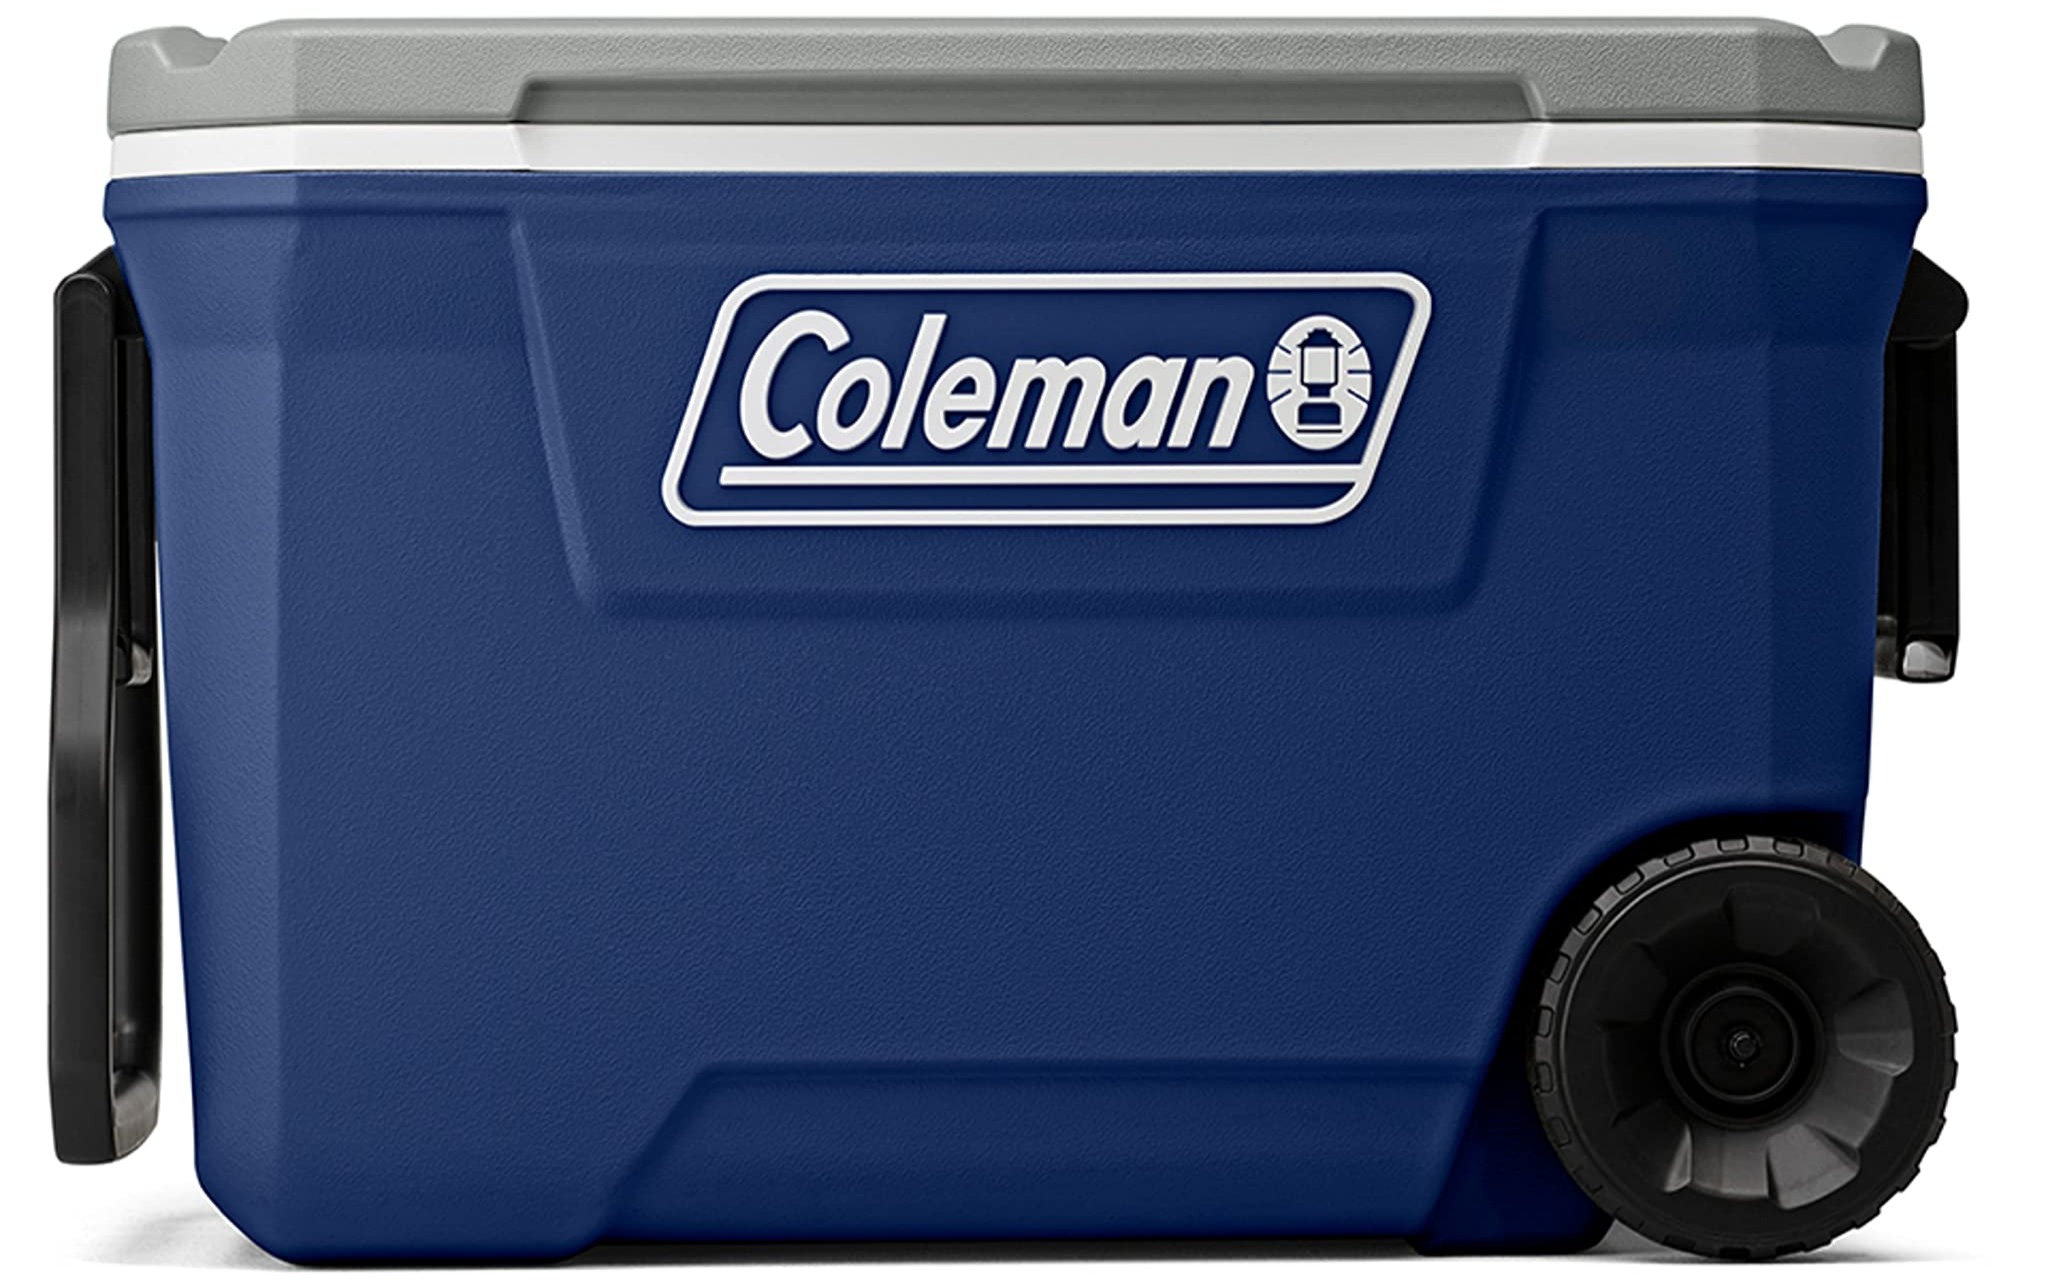 Limited-time deal: Coleman 316 Series Insulated Portable Cooler with Heavy Duty Wheels, Leak-Proof Wheeled Cooler with 100+ Can Capacity, Keeps Ice for up to 5 Days, Grea - $44.67